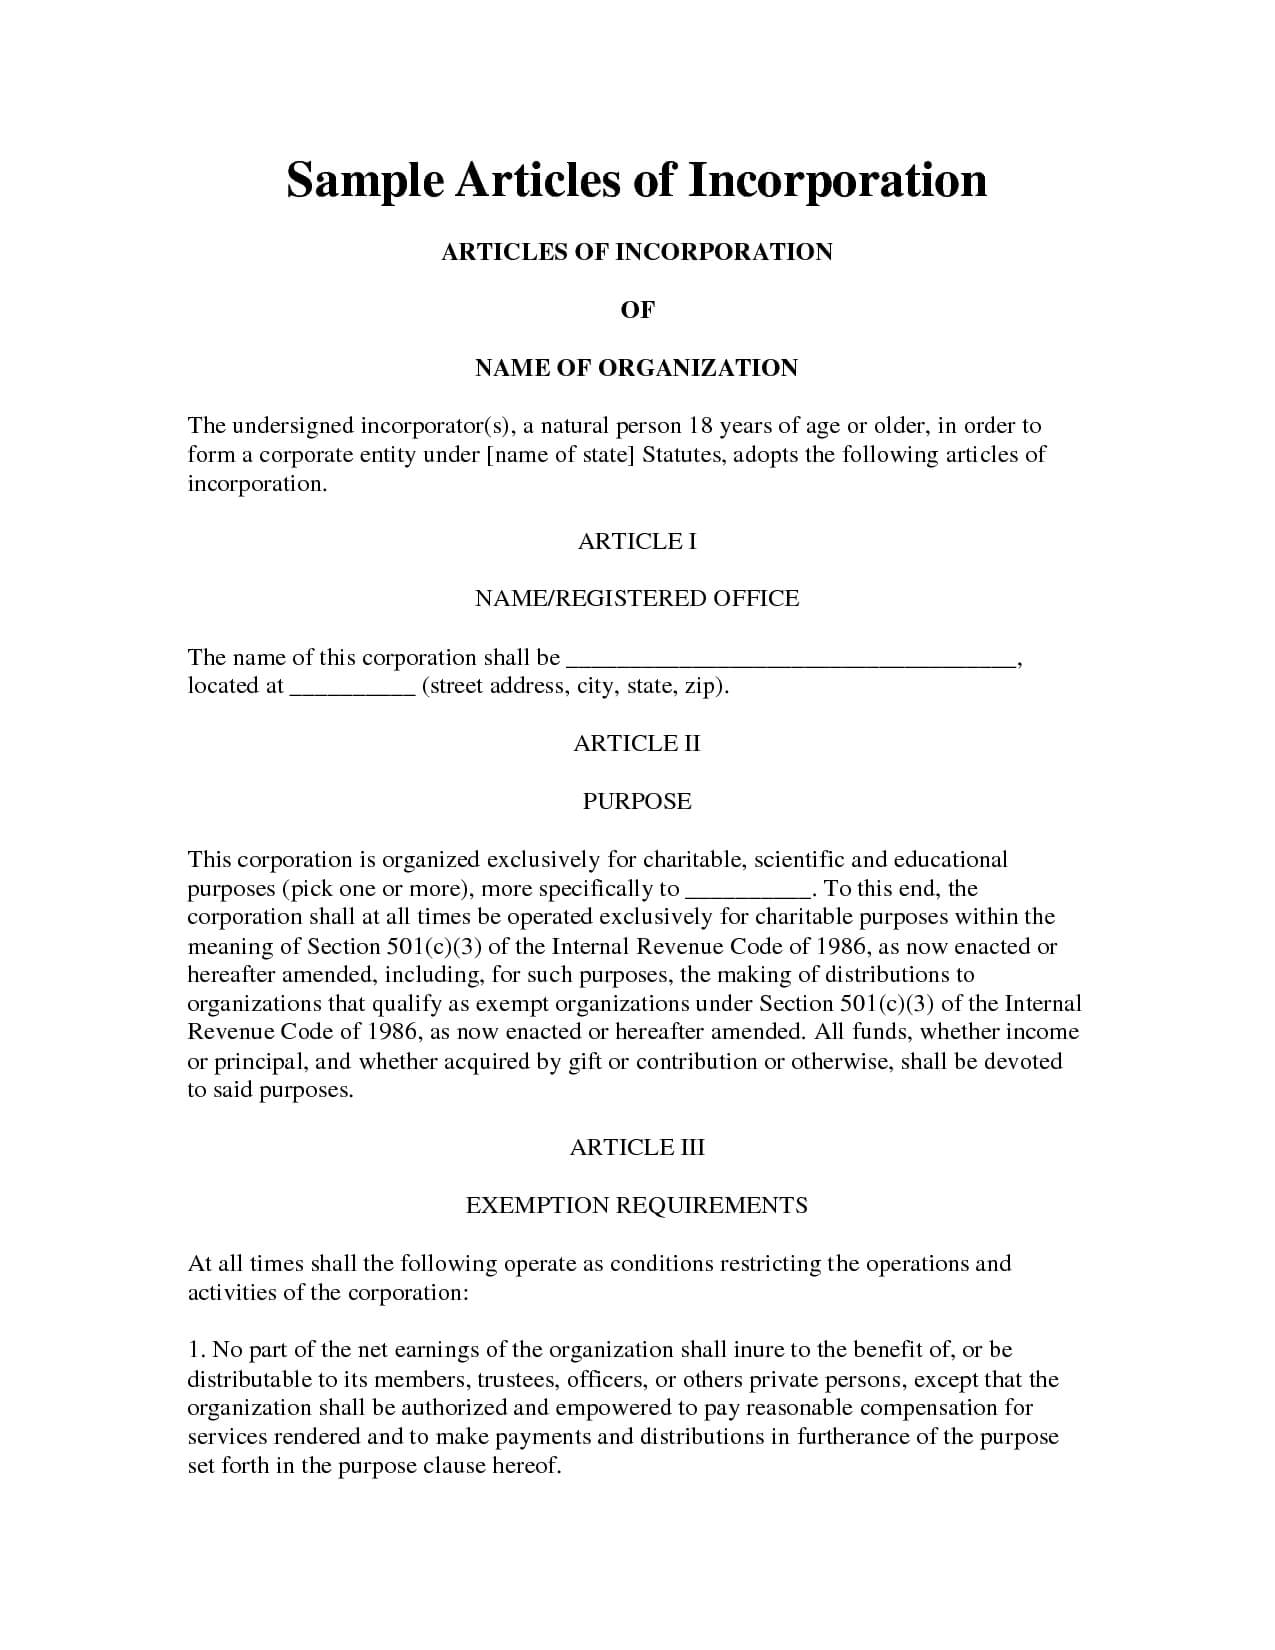 Sample Articles Of Incorporation Company Documents For With Articles Of Organization Template